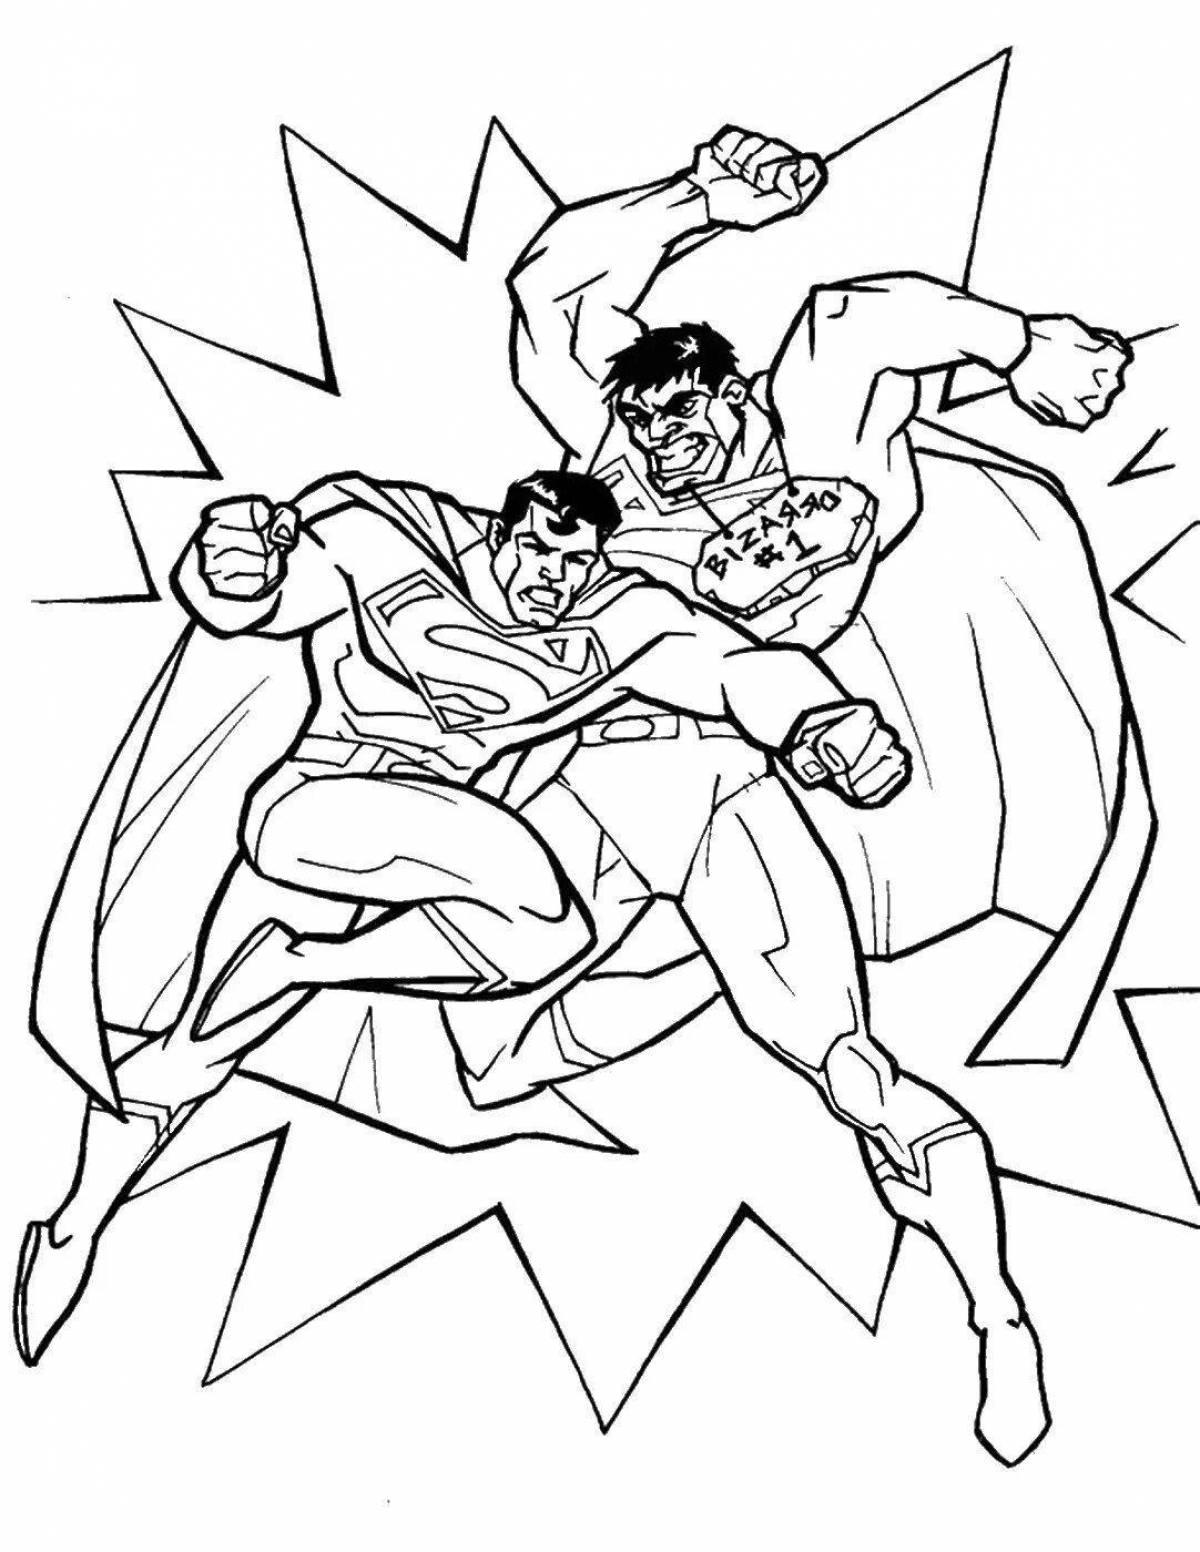 Superman awesome coloring book